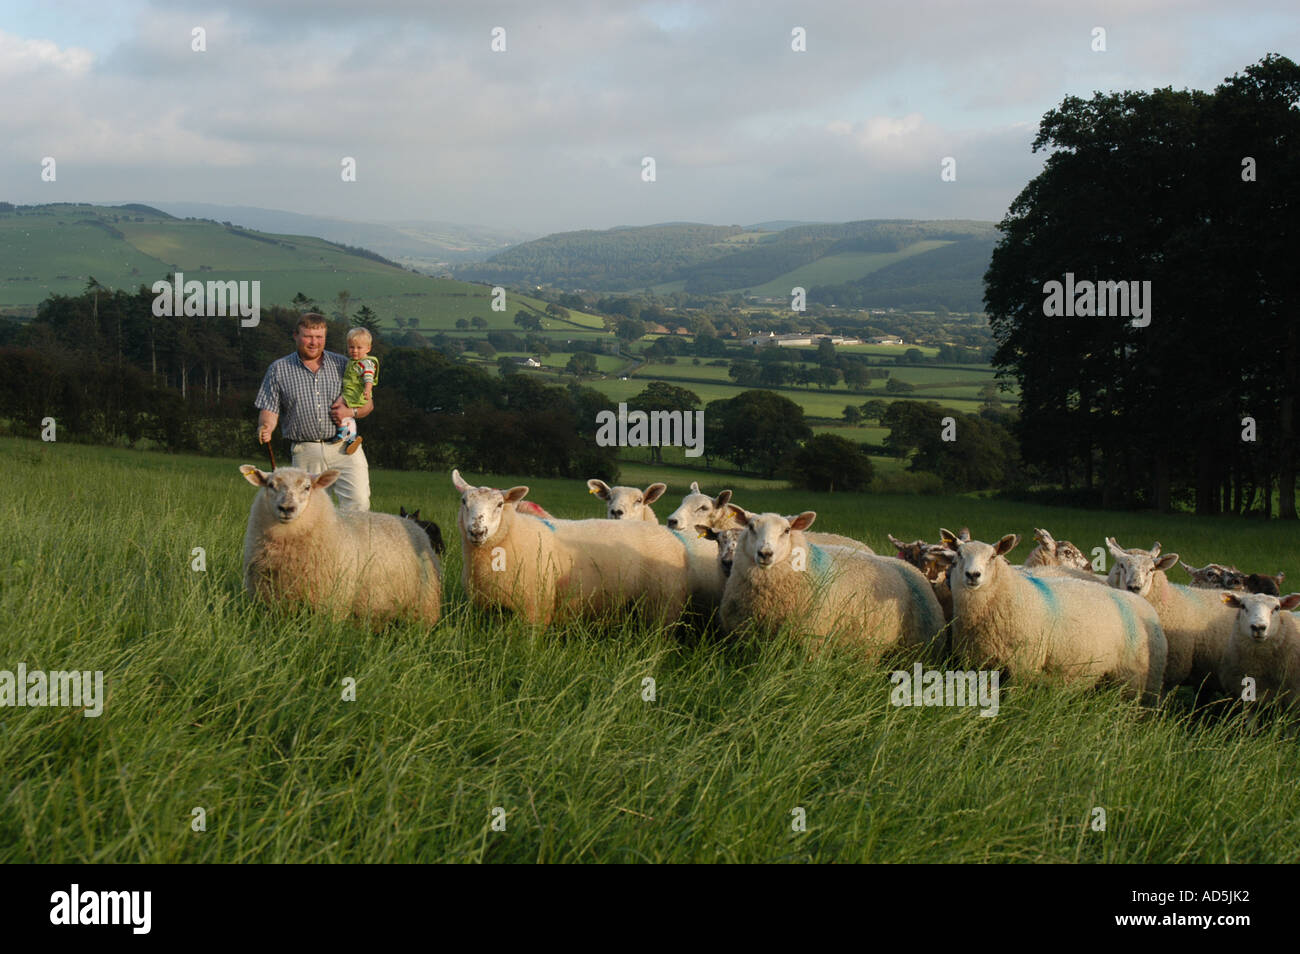 A welsh hill farmer and young son with flock of sheep in a field in the Ystwyth Valley near Aberystwyth Wales UK Stock Photo